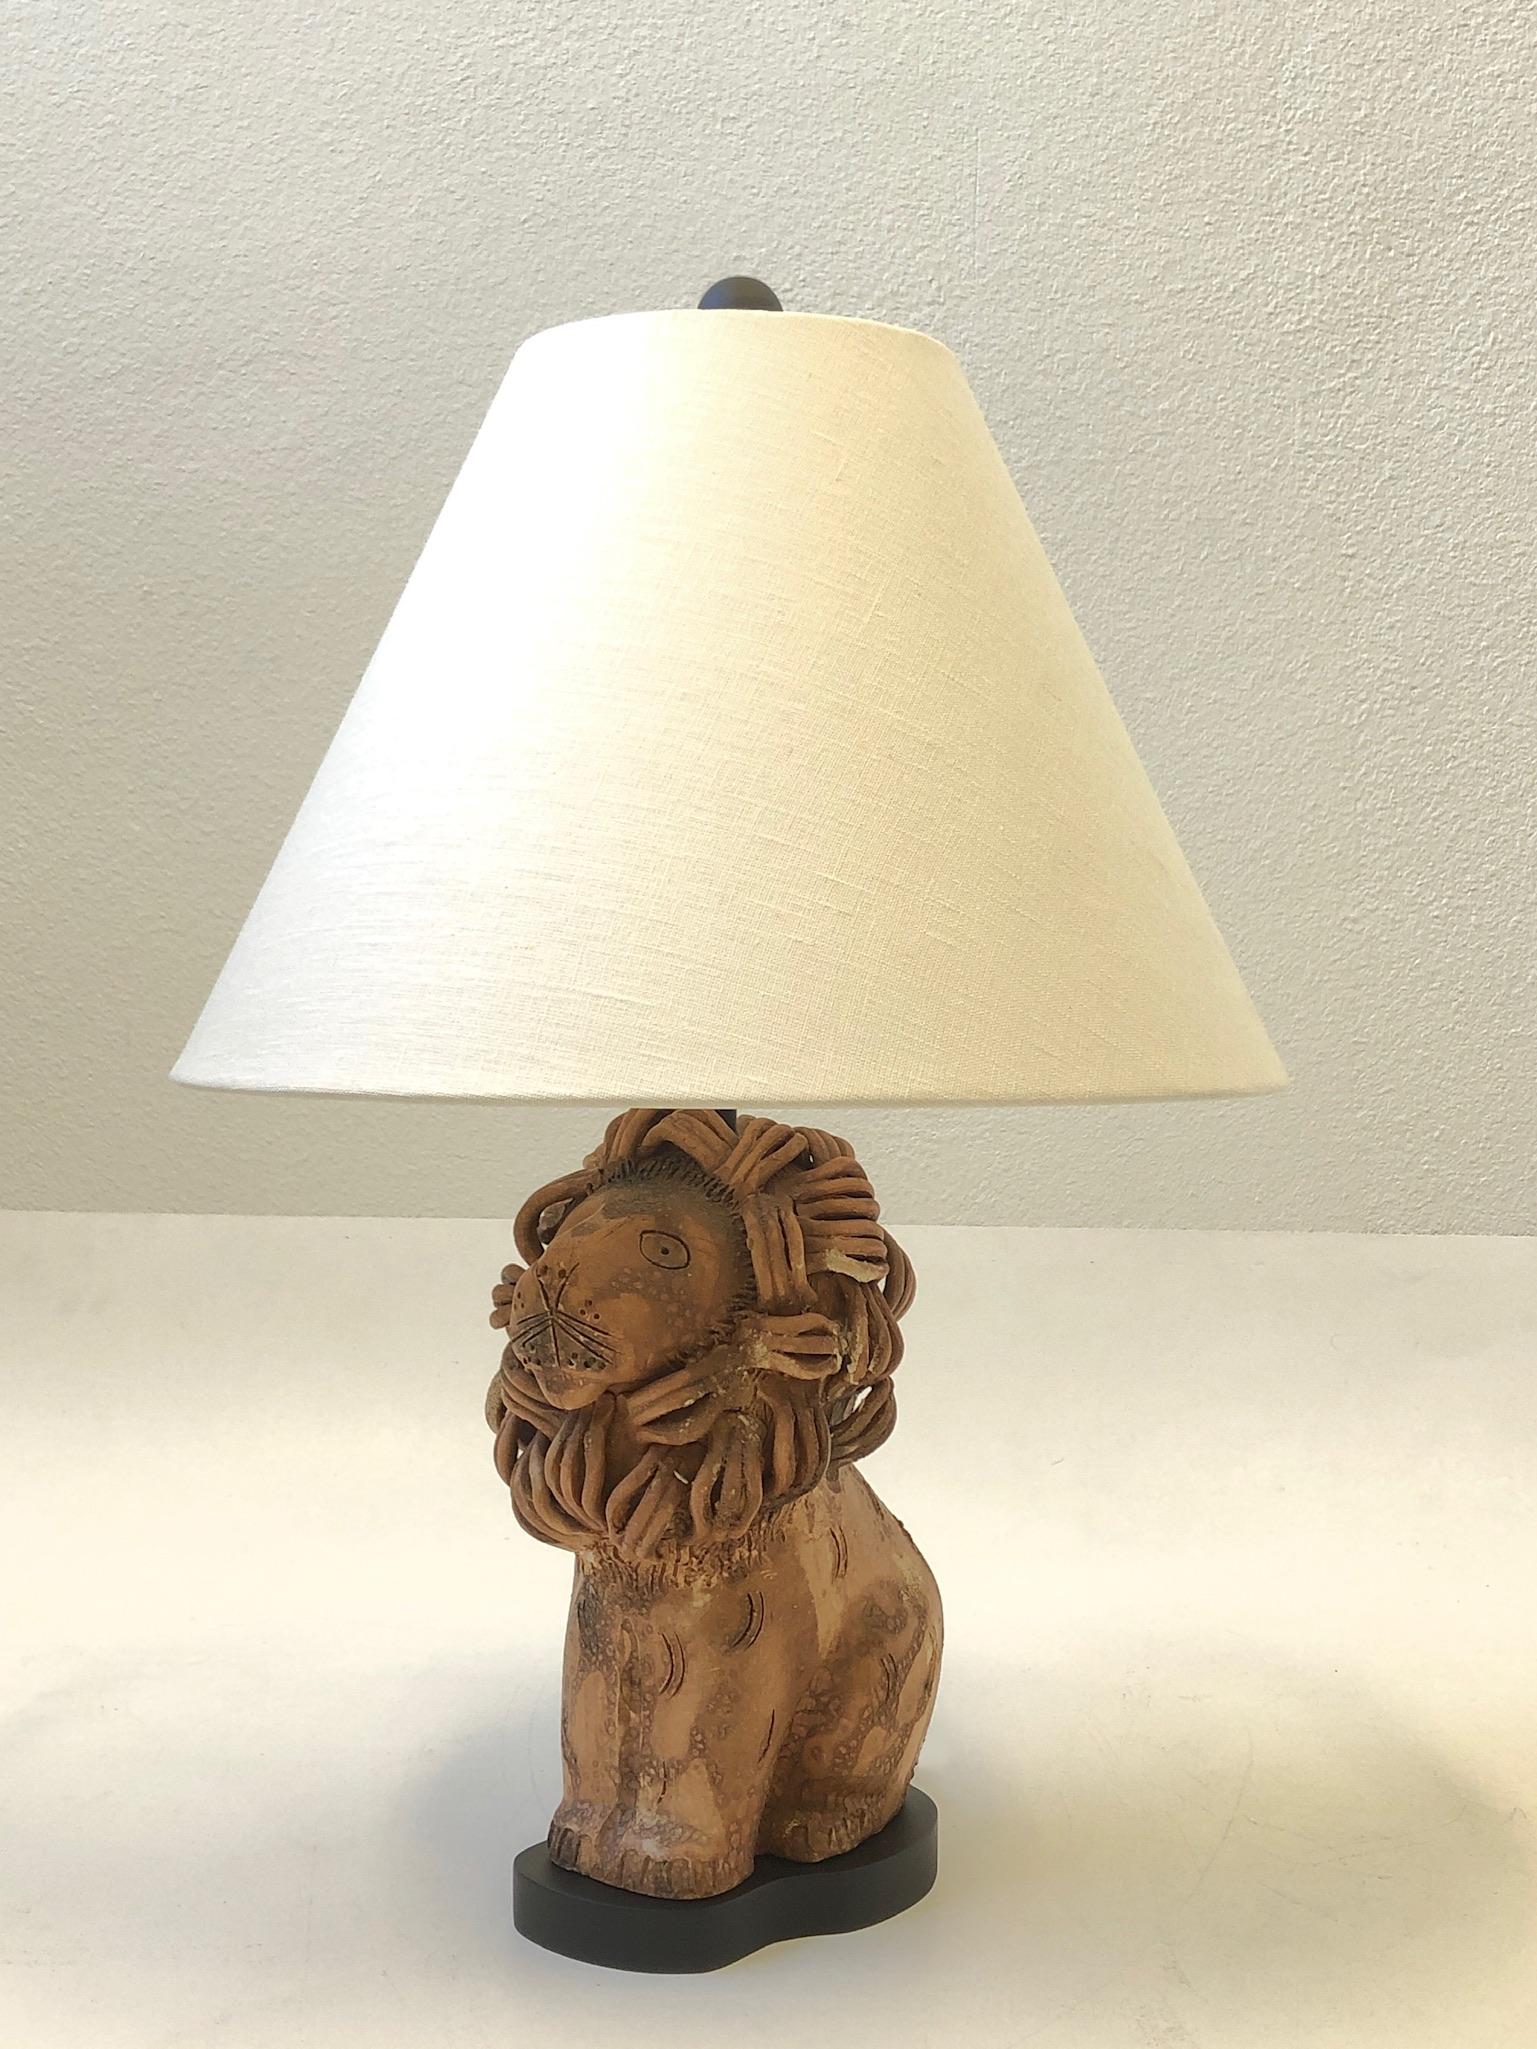 A rare 1970s ceramic lion table lamp by renowned Italian ceramicist Aldo Londi for Bitossi. The lamp is made out of ceramic with some volcanic glazed. The lion retains the made in Italian tag(see detail photos). Newly rewired and vanilla linen